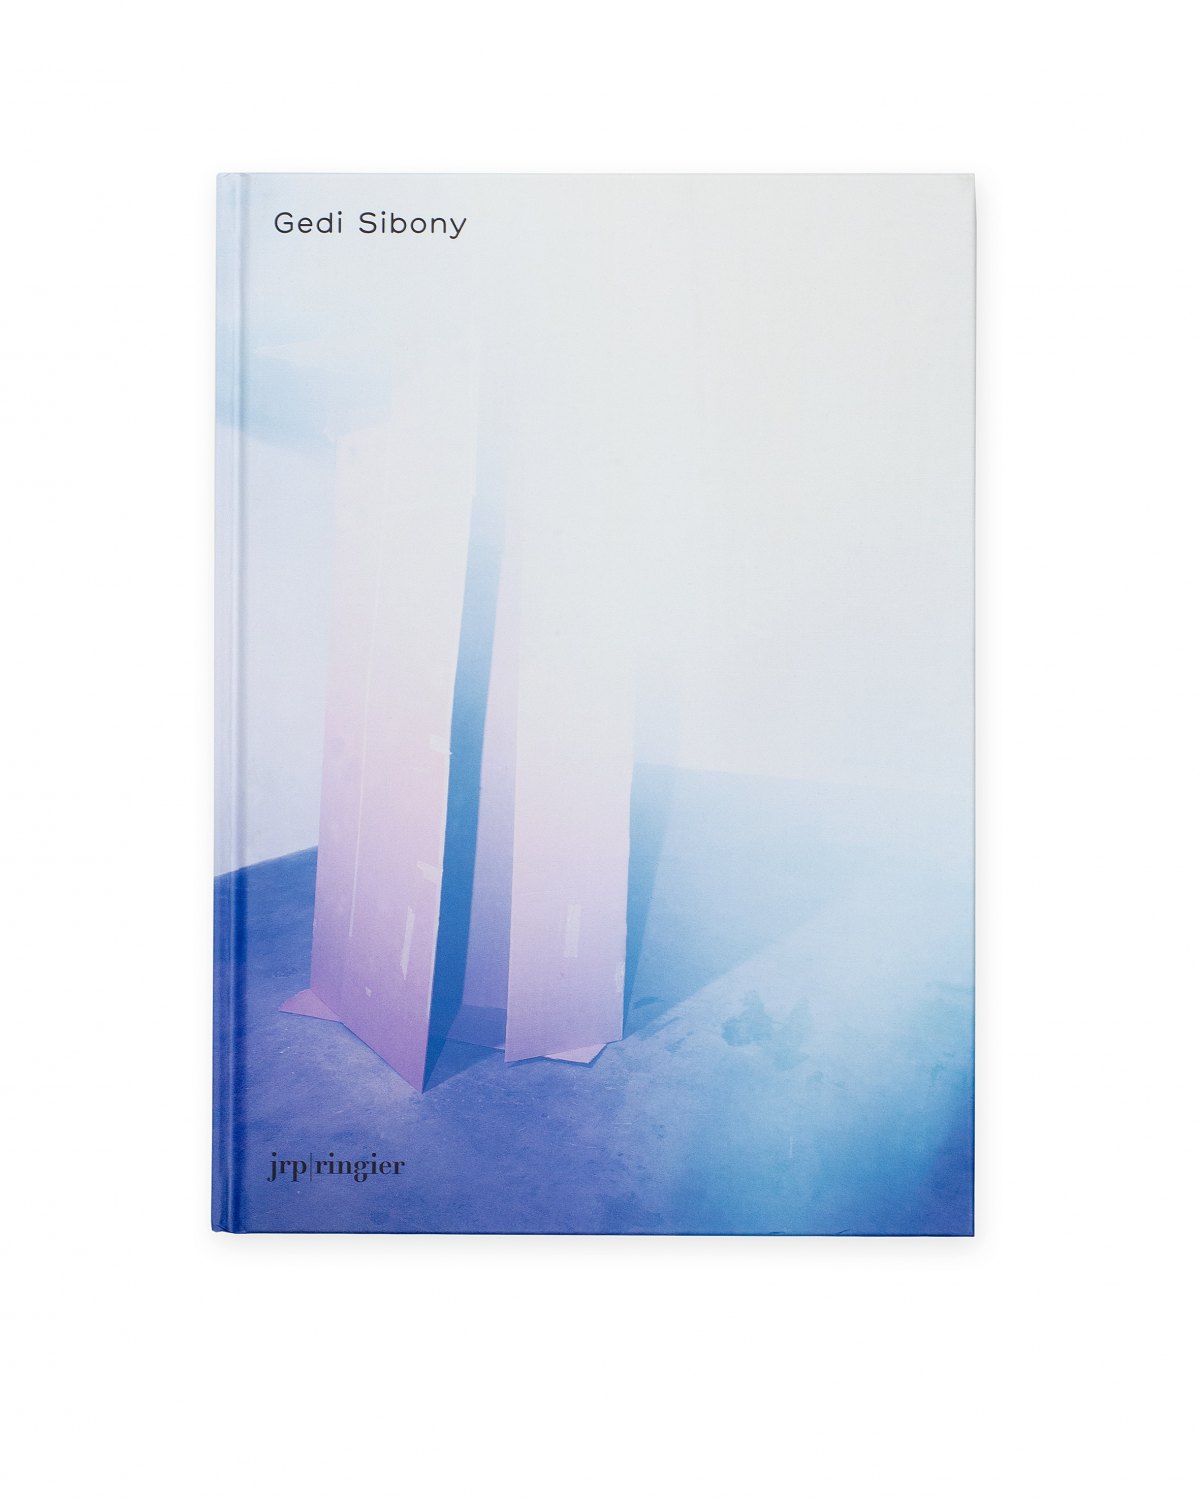 Gedi Sibony, First Monograph ed. by Giovanni Carmine, publ. with Kunst Halle Sankt Gallen, FRAC Champagne-Ardenne, Reims, and Contemporary Art Museum St. Louis, Sankt Gallen/Reims/St. Louis 2009, 64 p.  ISBN 978-3-90582-989-1